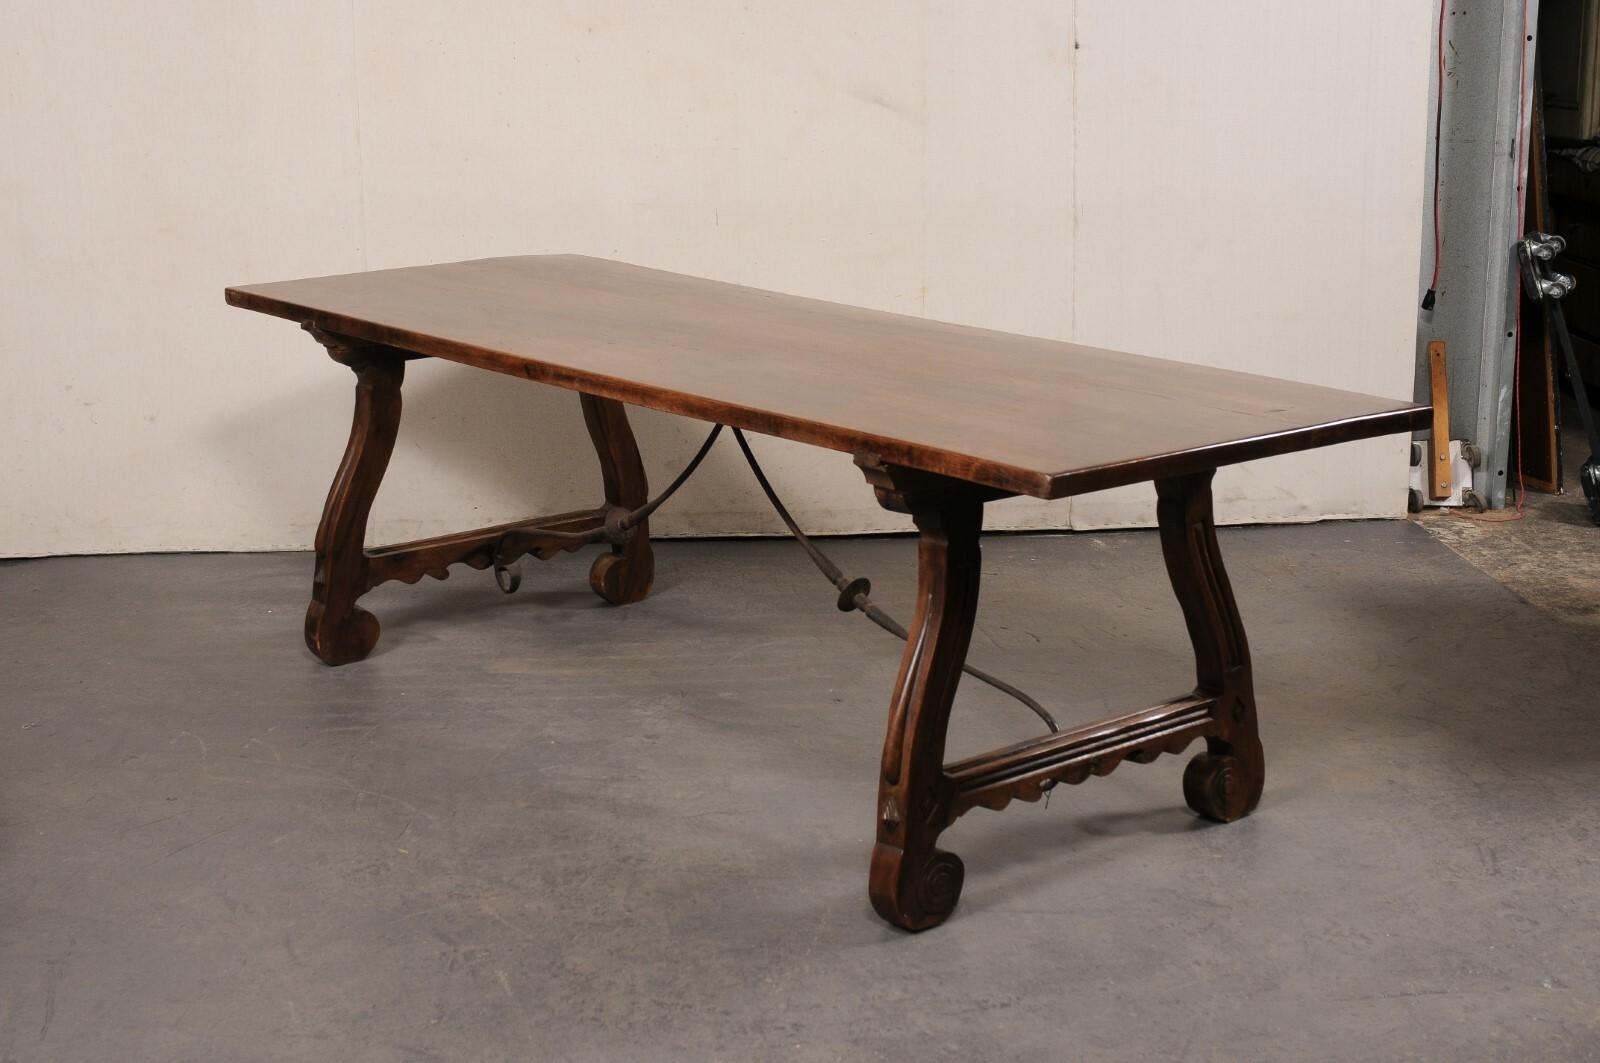 Spanish Carved Walnut Wood Trestle-Leg Table w/Forged Iron Stretcher, 8+ Ft Long For Sale 5